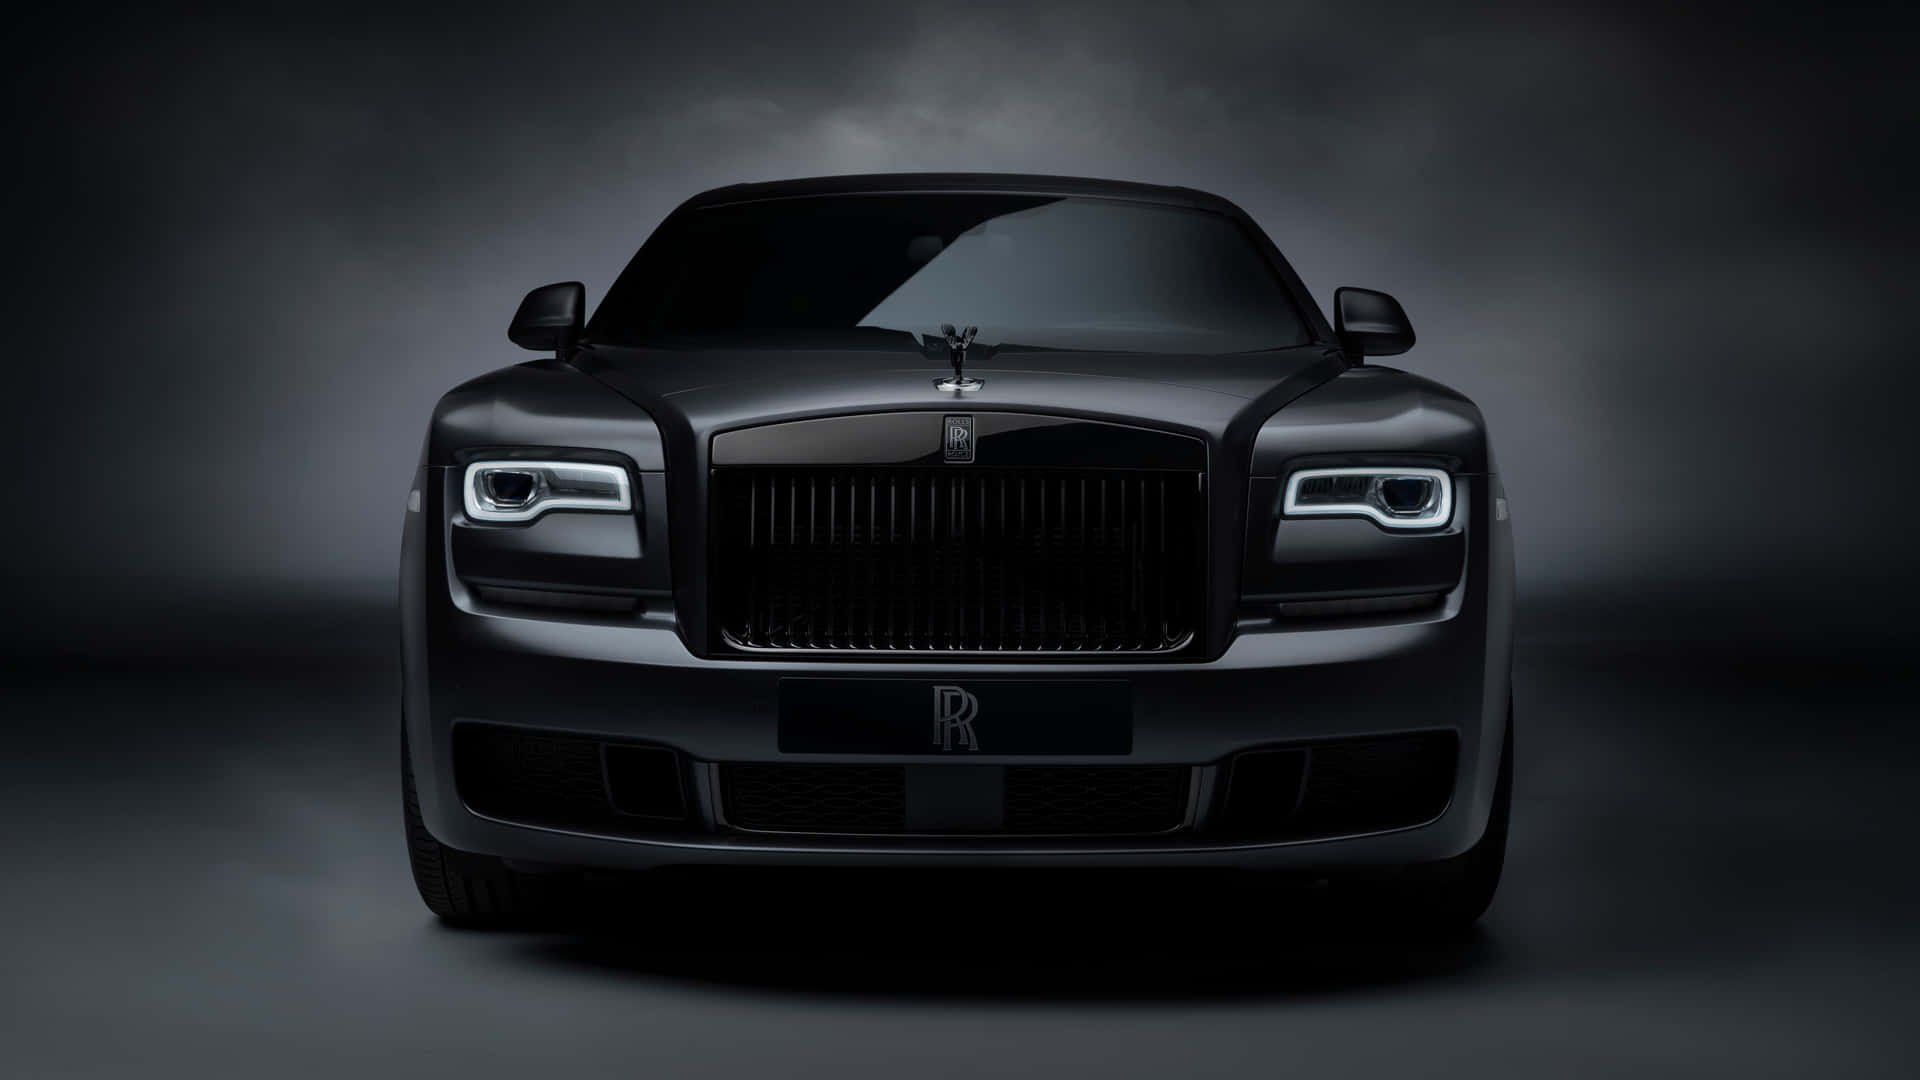 Captivating Luxury: Rolls Royce at its Finest